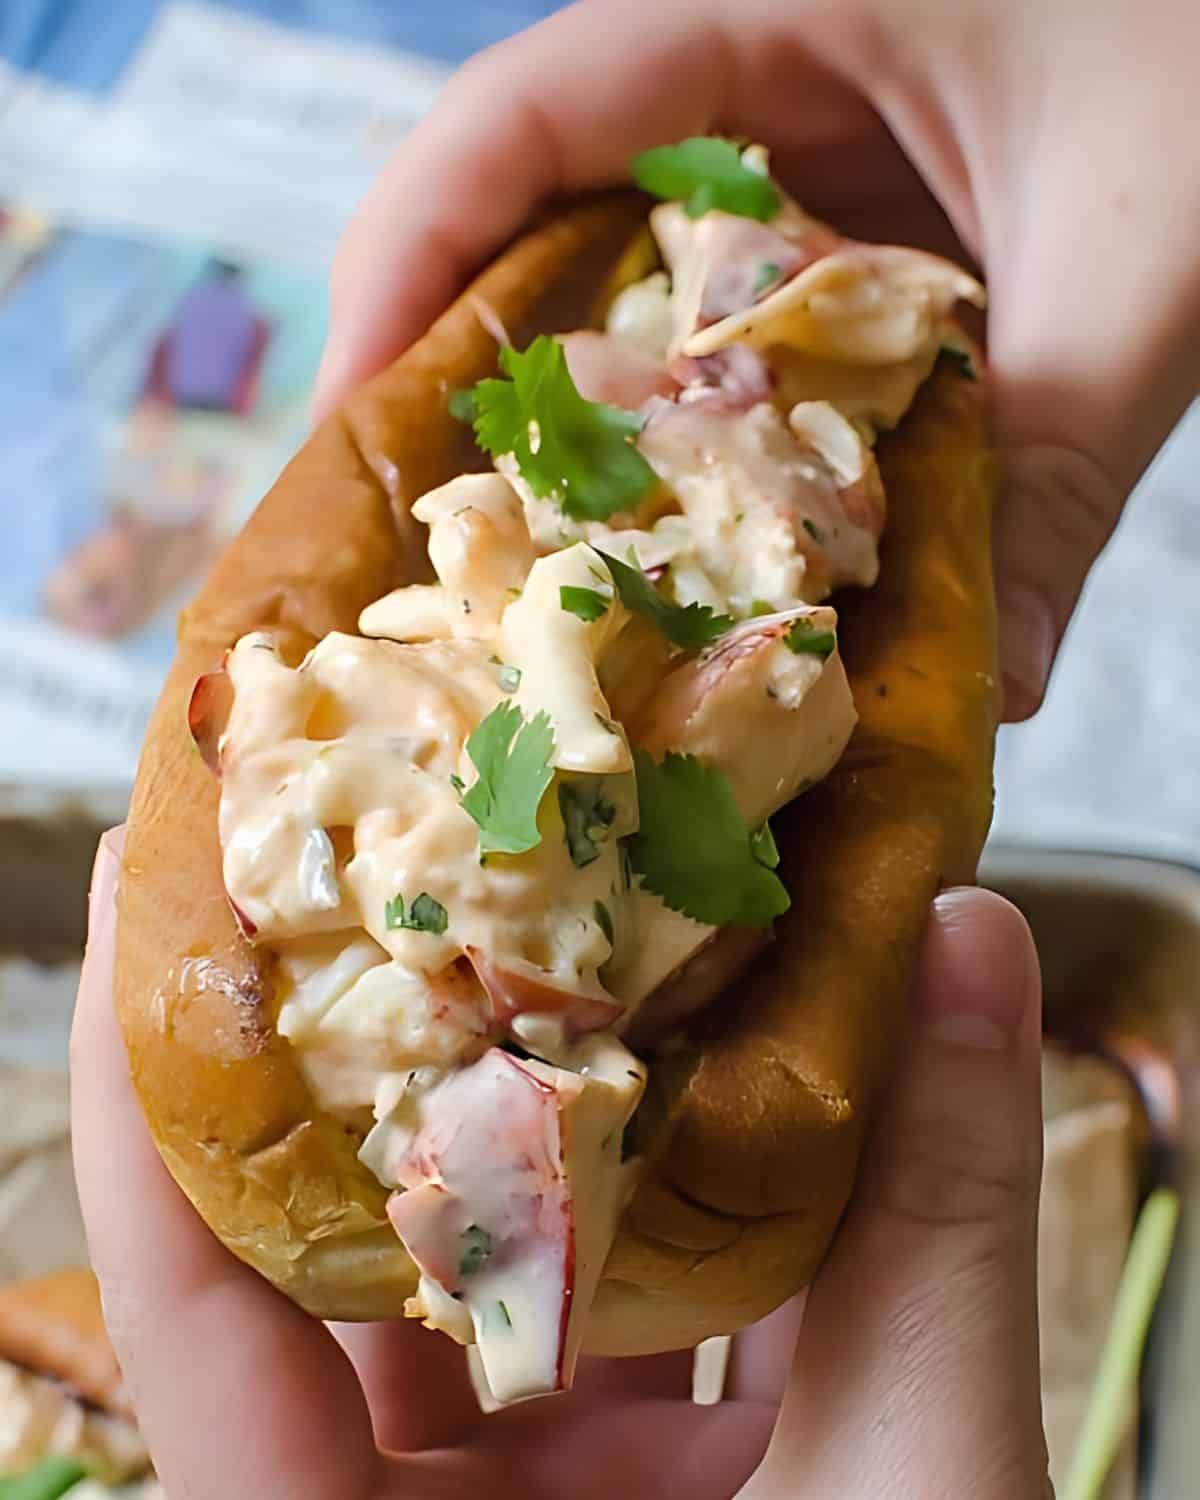 Holding a lobster roll with two hands.